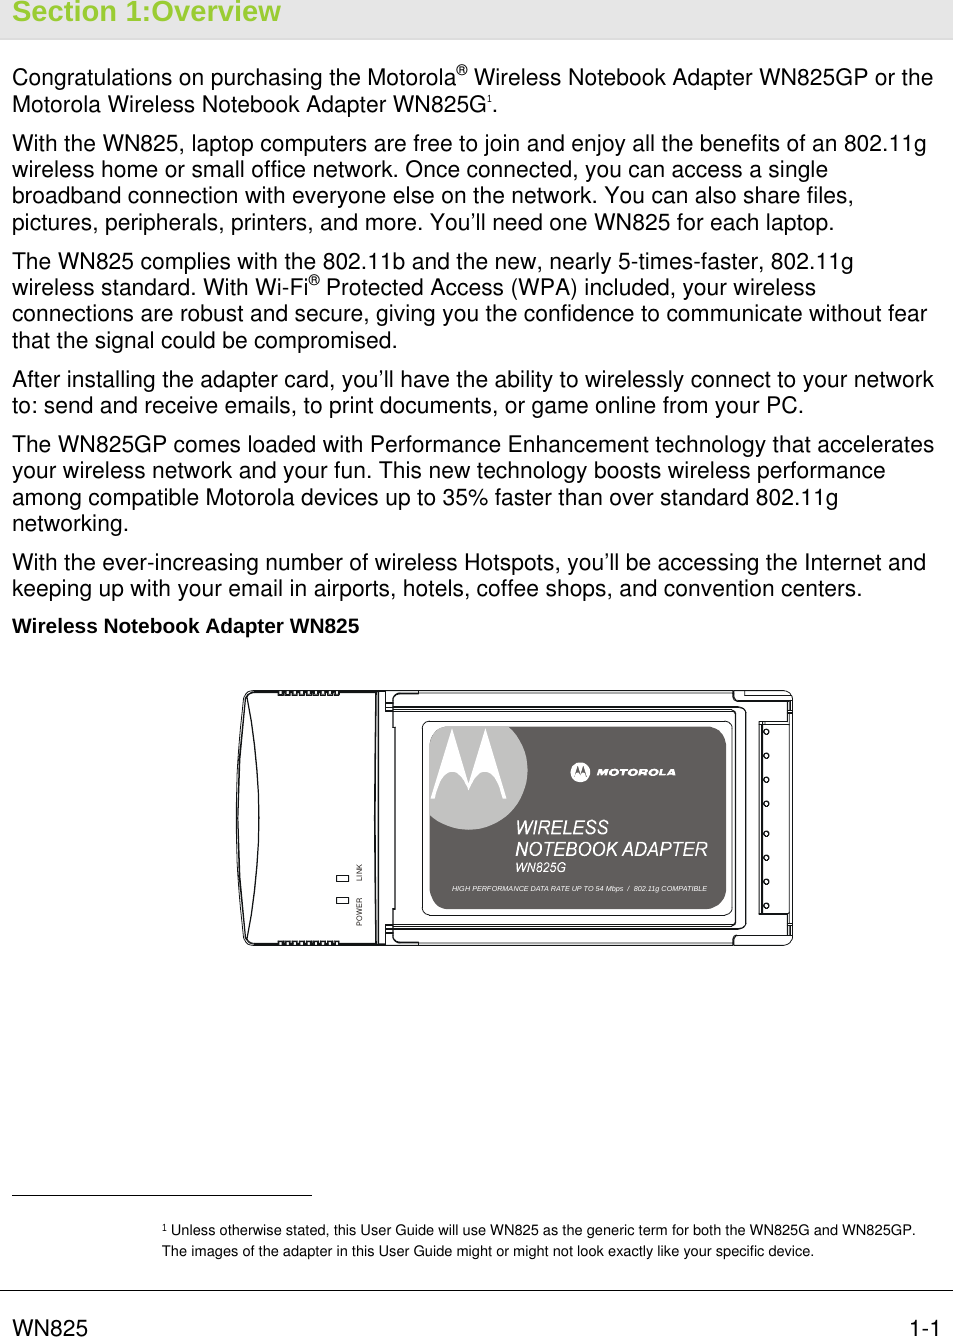   WN825   1-1Section 1:Overview Congratulations on purchasing the Motorola® Wireless Notebook Adapter WN825GP or the Motorola Wireless Notebook Adapter WN825G1.  With the WN825, laptop computers are free to join and enjoy all the benefits of an 802.11g wireless home or small office network. Once connected, you can access a single broadband connection with everyone else on the network. You can also share files, pictures, peripherals, printers, and more. You’ll need one WN825 for each laptop. The WN825 complies with the 802.11b and the new, nearly 5-times-faster, 802.11g wireless standard. With Wi-Fi® Protected Access (WPA) included, your wireless connections are robust and secure, giving you the confidence to communicate without fear that the signal could be compromised. After installing the adapter card, you’ll have the ability to wirelessly connect to your network to: send and receive emails, to print documents, or game online from your PC. The WN825GP comes loaded with Performance Enhancement technology that accelerates your wireless network and your fun. This new technology boosts wireless performance among compatible Motorola devices up to 35% faster than over standard 802.11g networking.  With the ever-increasing number of wireless Hotspots, you’ll be accessing the Internet and keeping up with your email in airports, hotels, coffee shops, and convention centers. Wireless Notebook Adapter WN825 LINKPOWERHIGH PERFORMANCE 54 Mbits/s DATA RATE  /  DRAFT 802.11G COMPLIANTHIGH PERFORMANCE DATA RATE UP TO 54 Mbps  /  802.11g COMPATIBLE                                                  1 Unless otherwise stated, this User Guide will use WN825 as the generic term for both the WN825G and WN825GP. The images of the adapter in this User Guide might or might not look exactly like your specific device.  